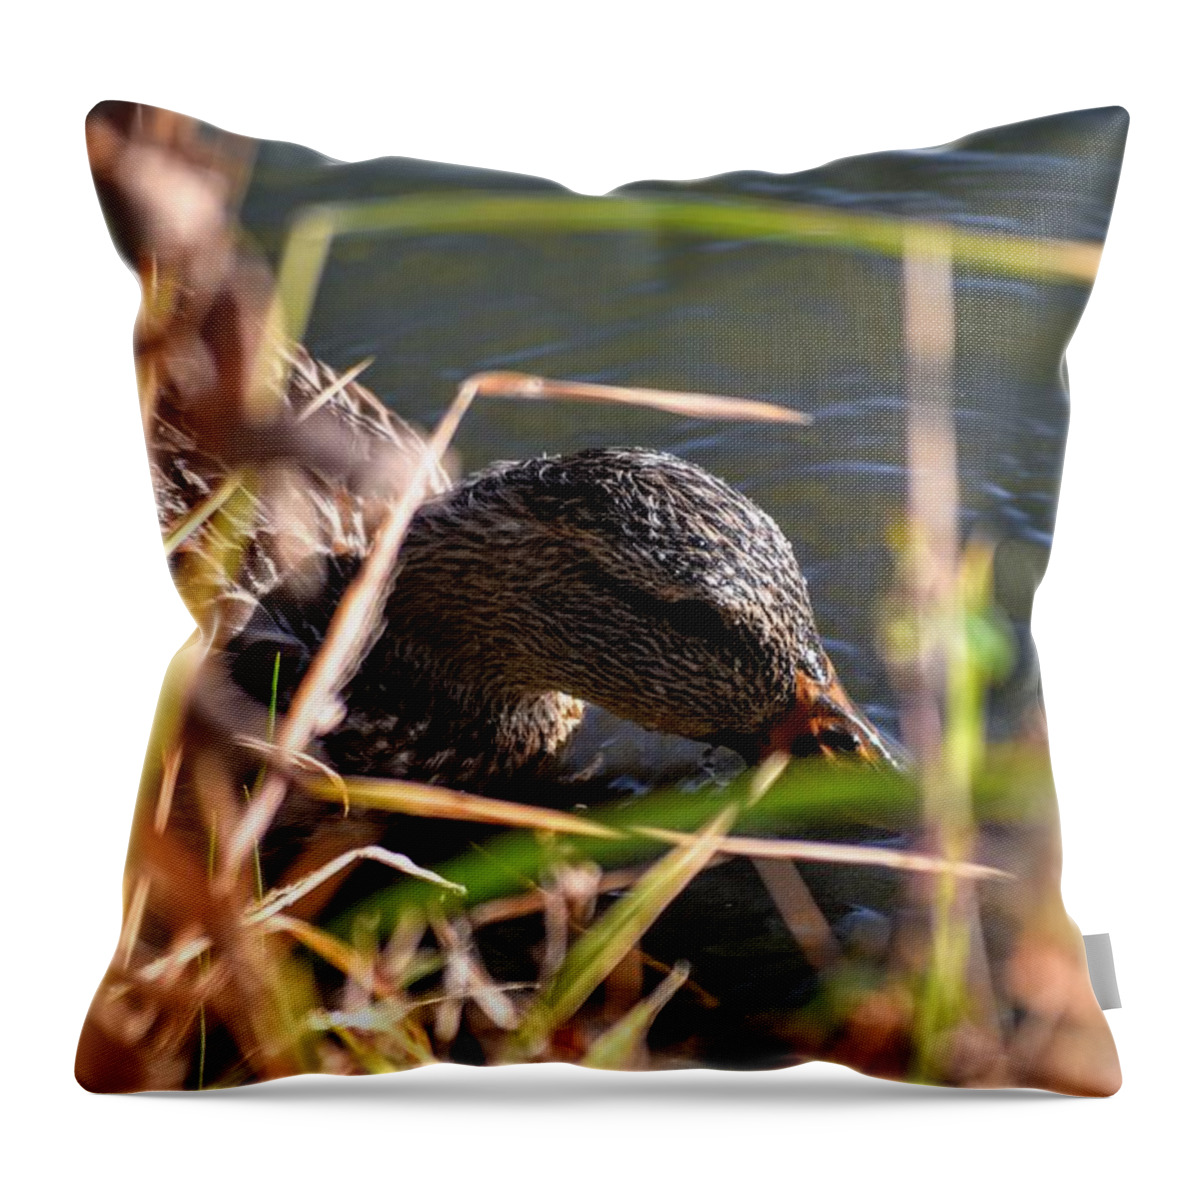 Duck Throw Pillow featuring the photograph Square Duck by Michael Brungardt